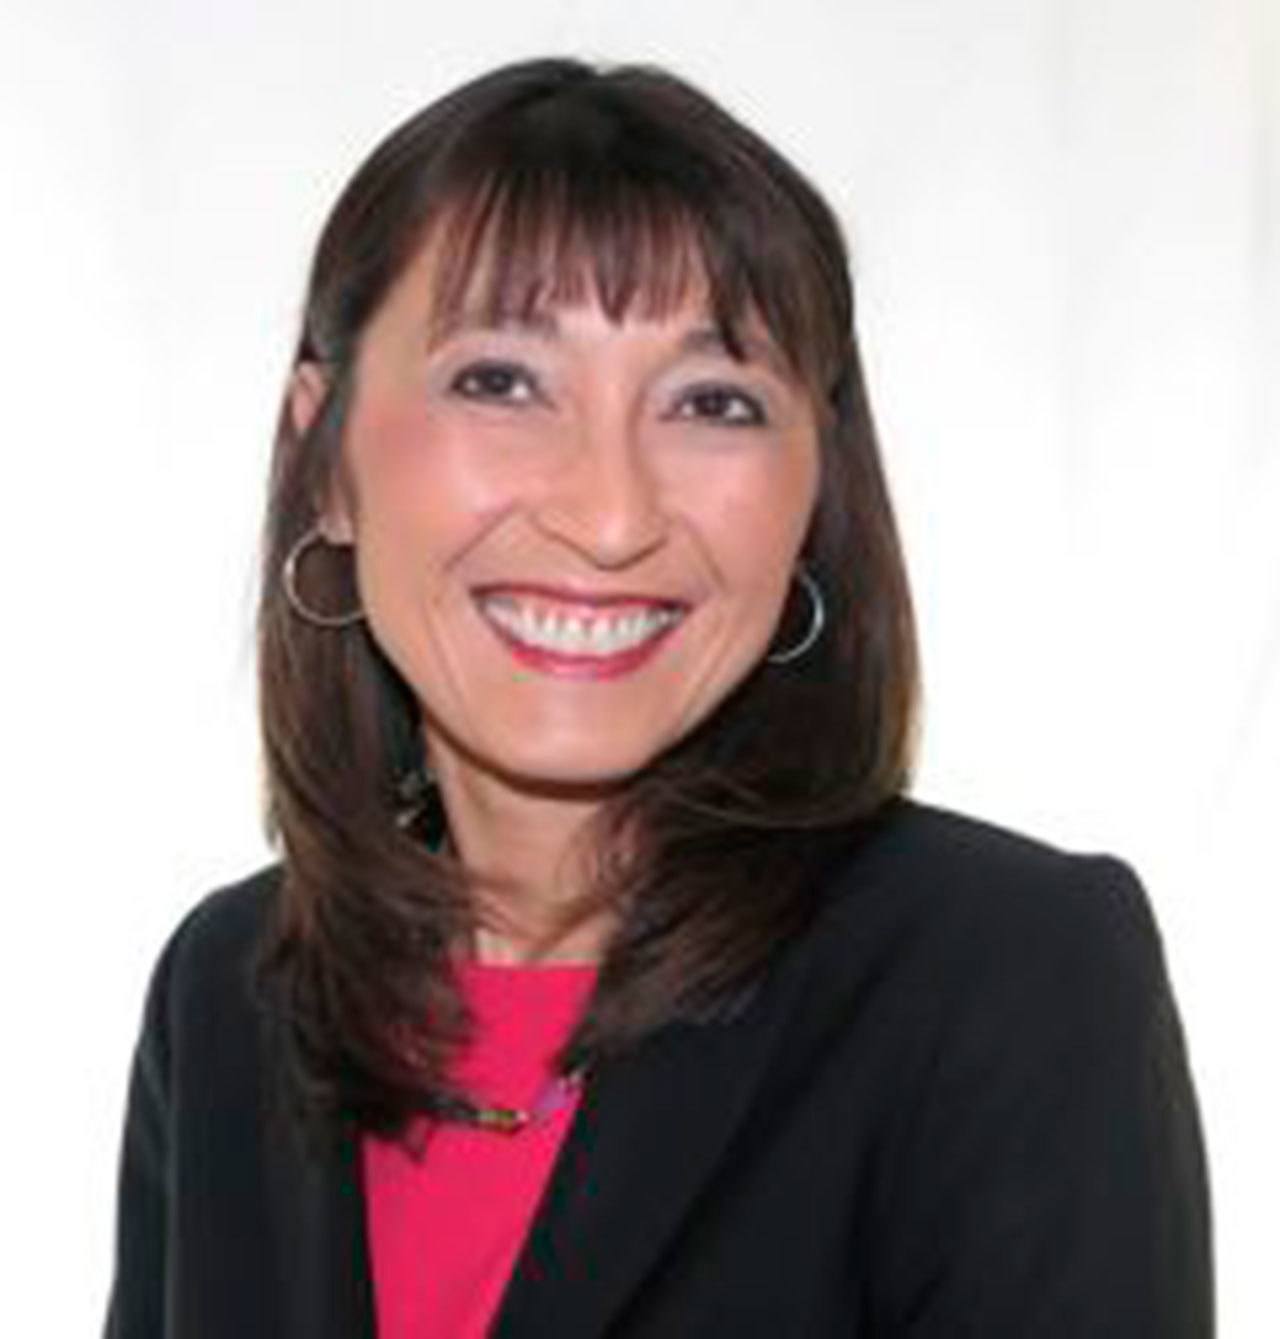 Julie Thuy Underwood is the new city manager for the city of Mercer Island. Photo courtesy of the city of Mercer Island